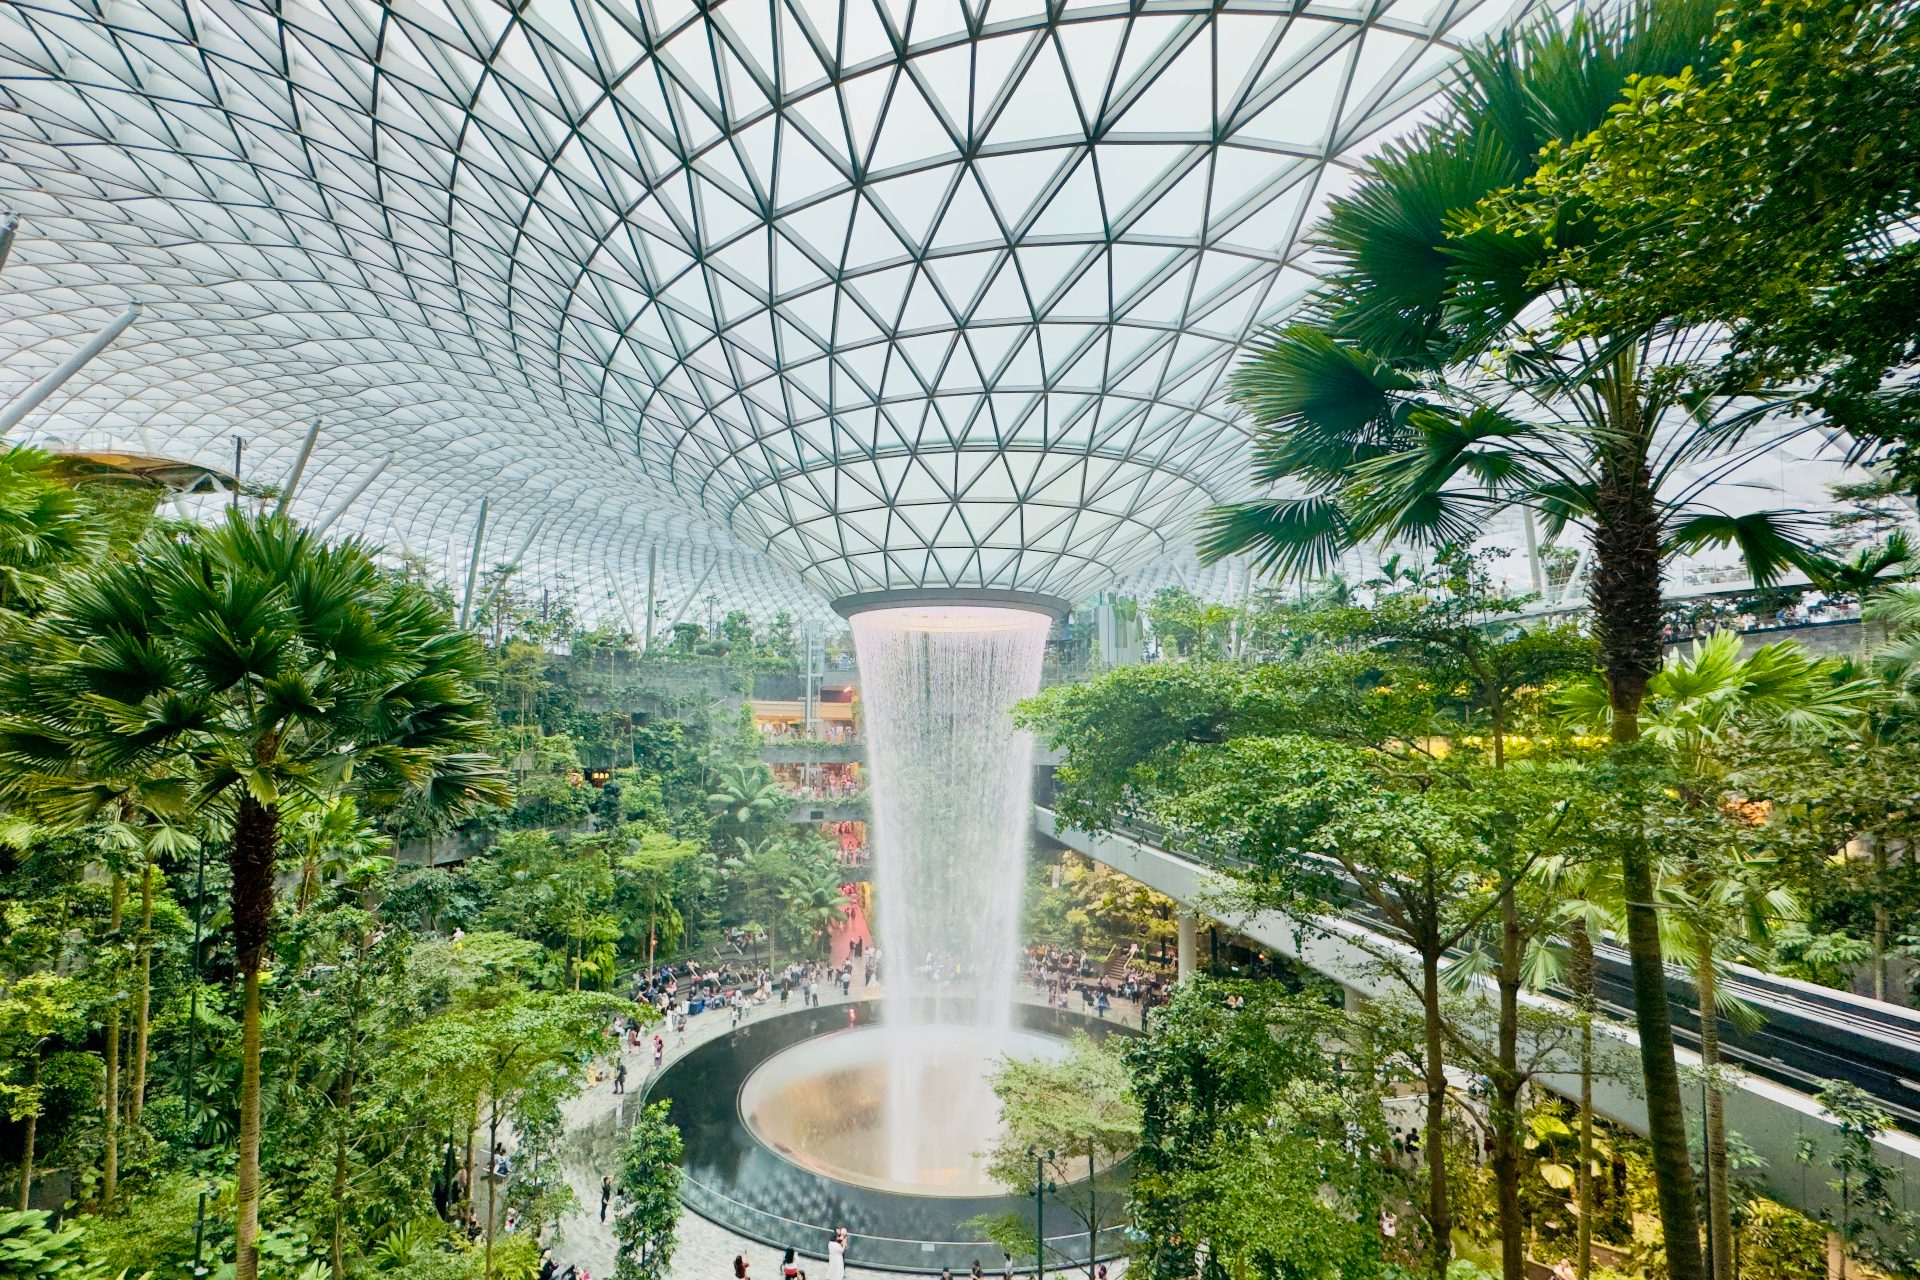 <p>Surroundings that enhance the perception of nature through sight, sound, or overall contact with water, relieve tension and stress, and restore a feeling of serenity and peace. In the image, you can see a part of the Jewel Changi, a shopping mall and entertainment complex in one of the terminals at Changi Airport, in Singapore.</p>